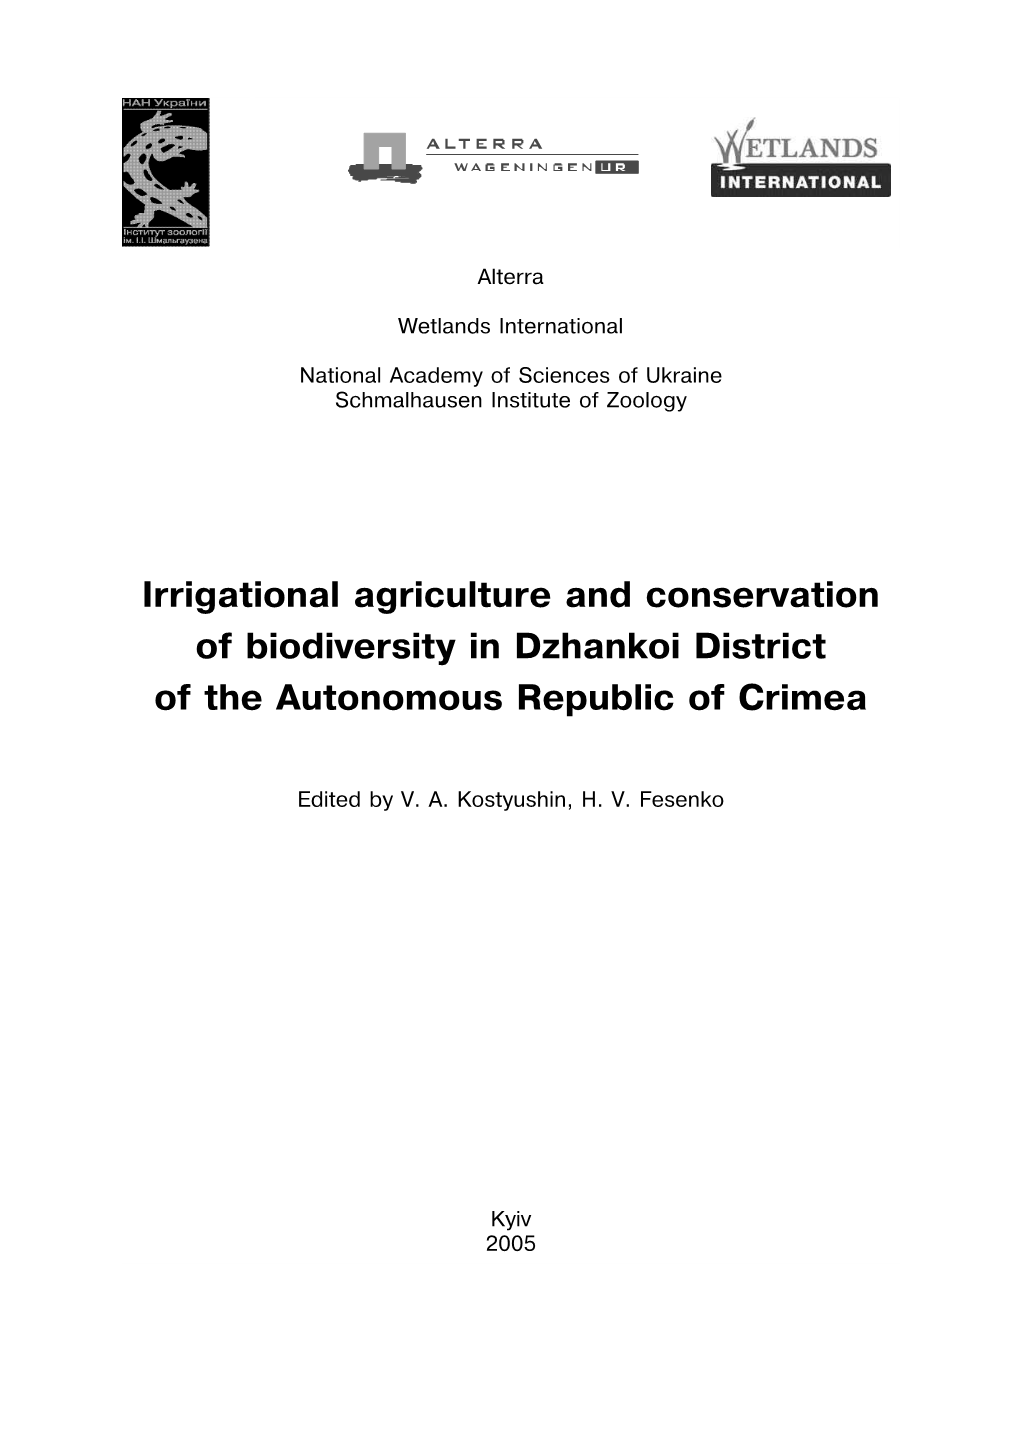 Irrigational Agriculture and Conservation of Biodiversity in Dzhankoi District of the Autonomous Republic of Crimea